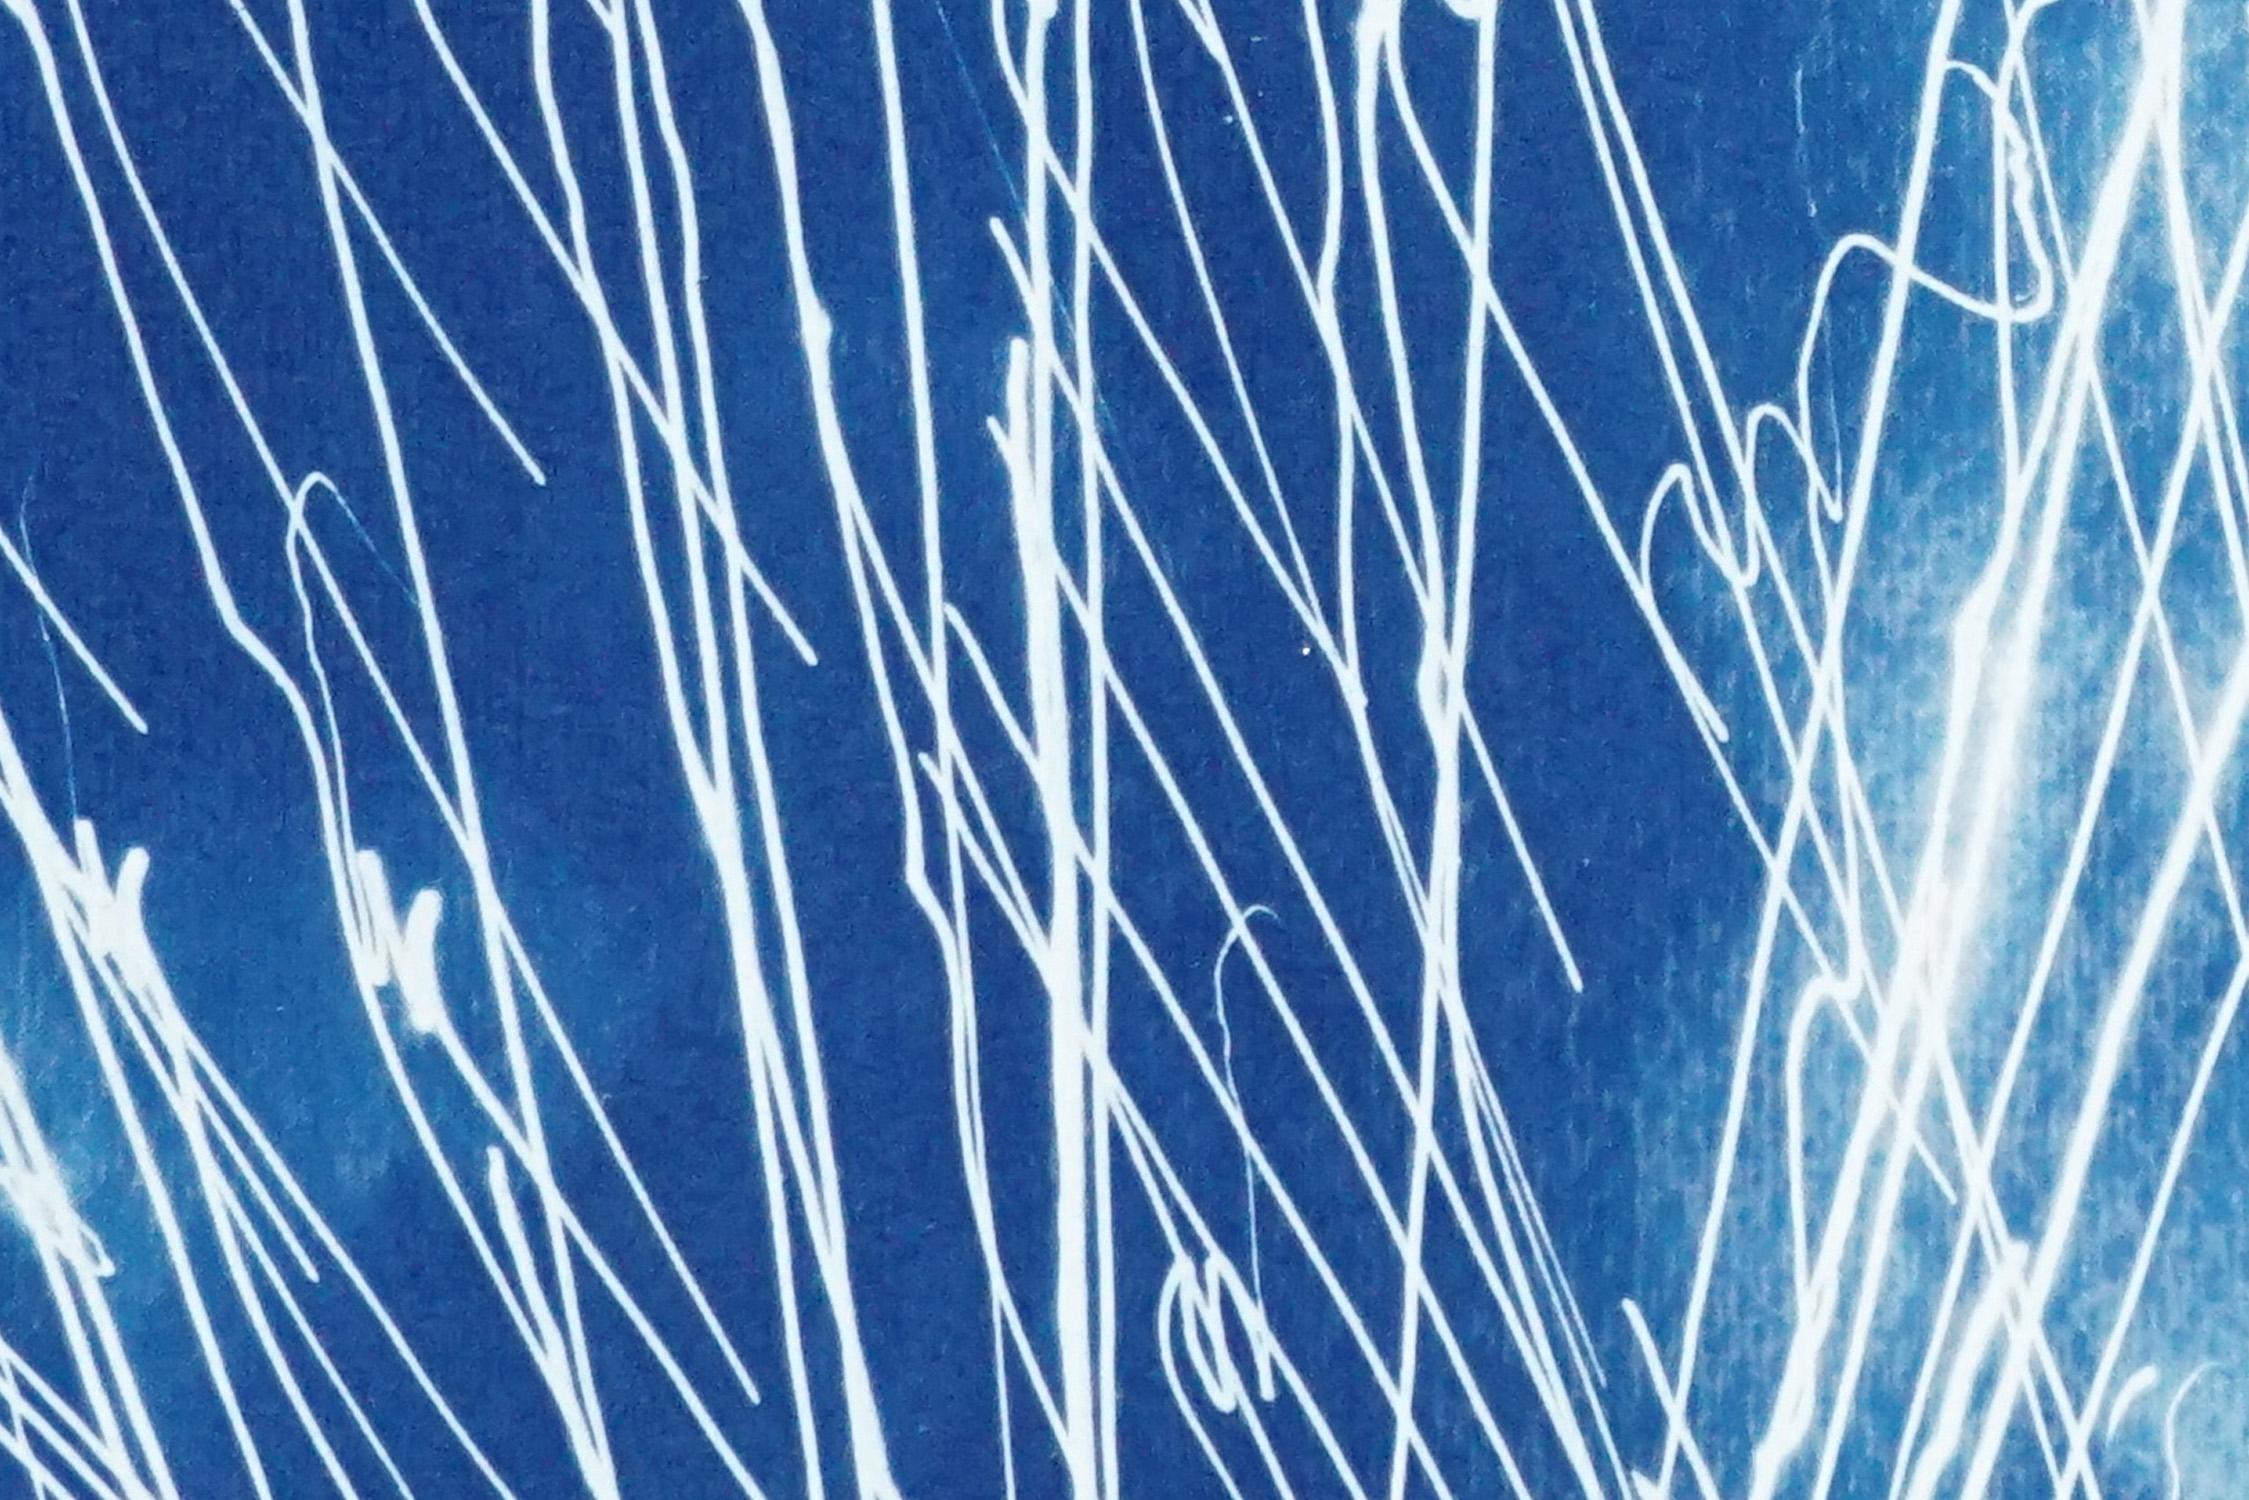 Fireworks Lights in Sky Blue Diptych, Handmade Cyanotype on Watercolor Paper  For Sale 3